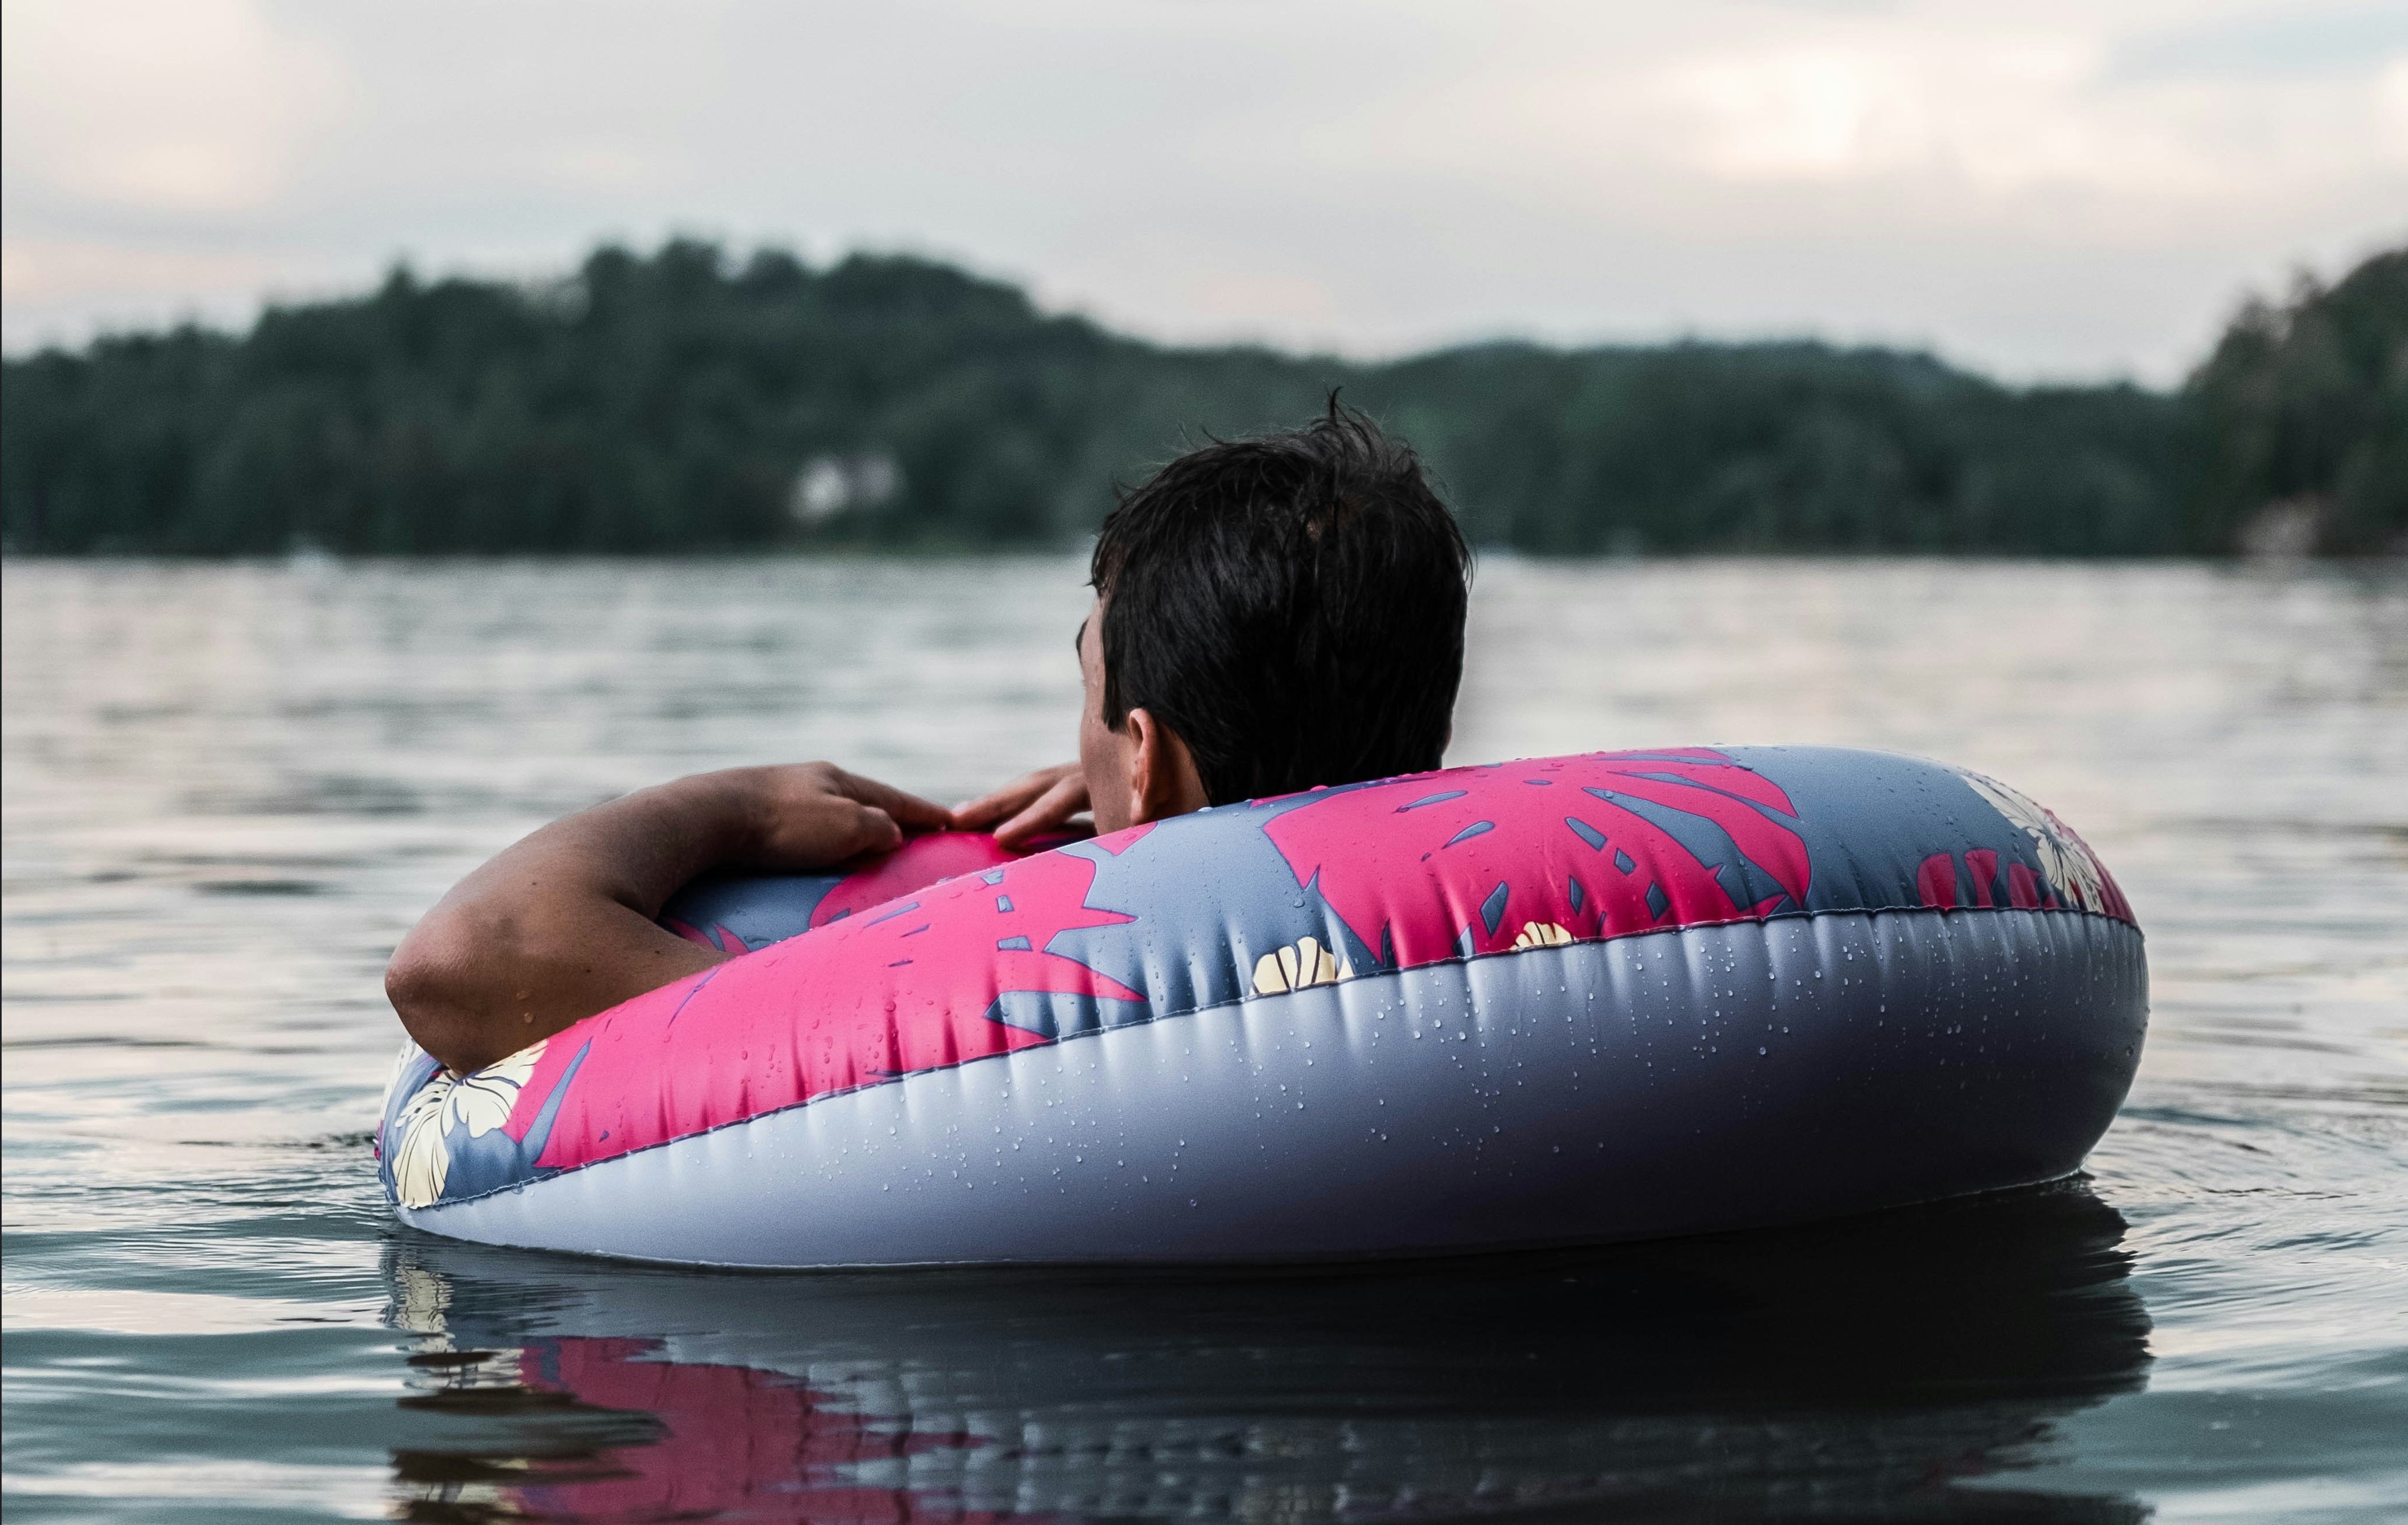 A man floating on a river in an inner tube on a cloudy day with hills in the background